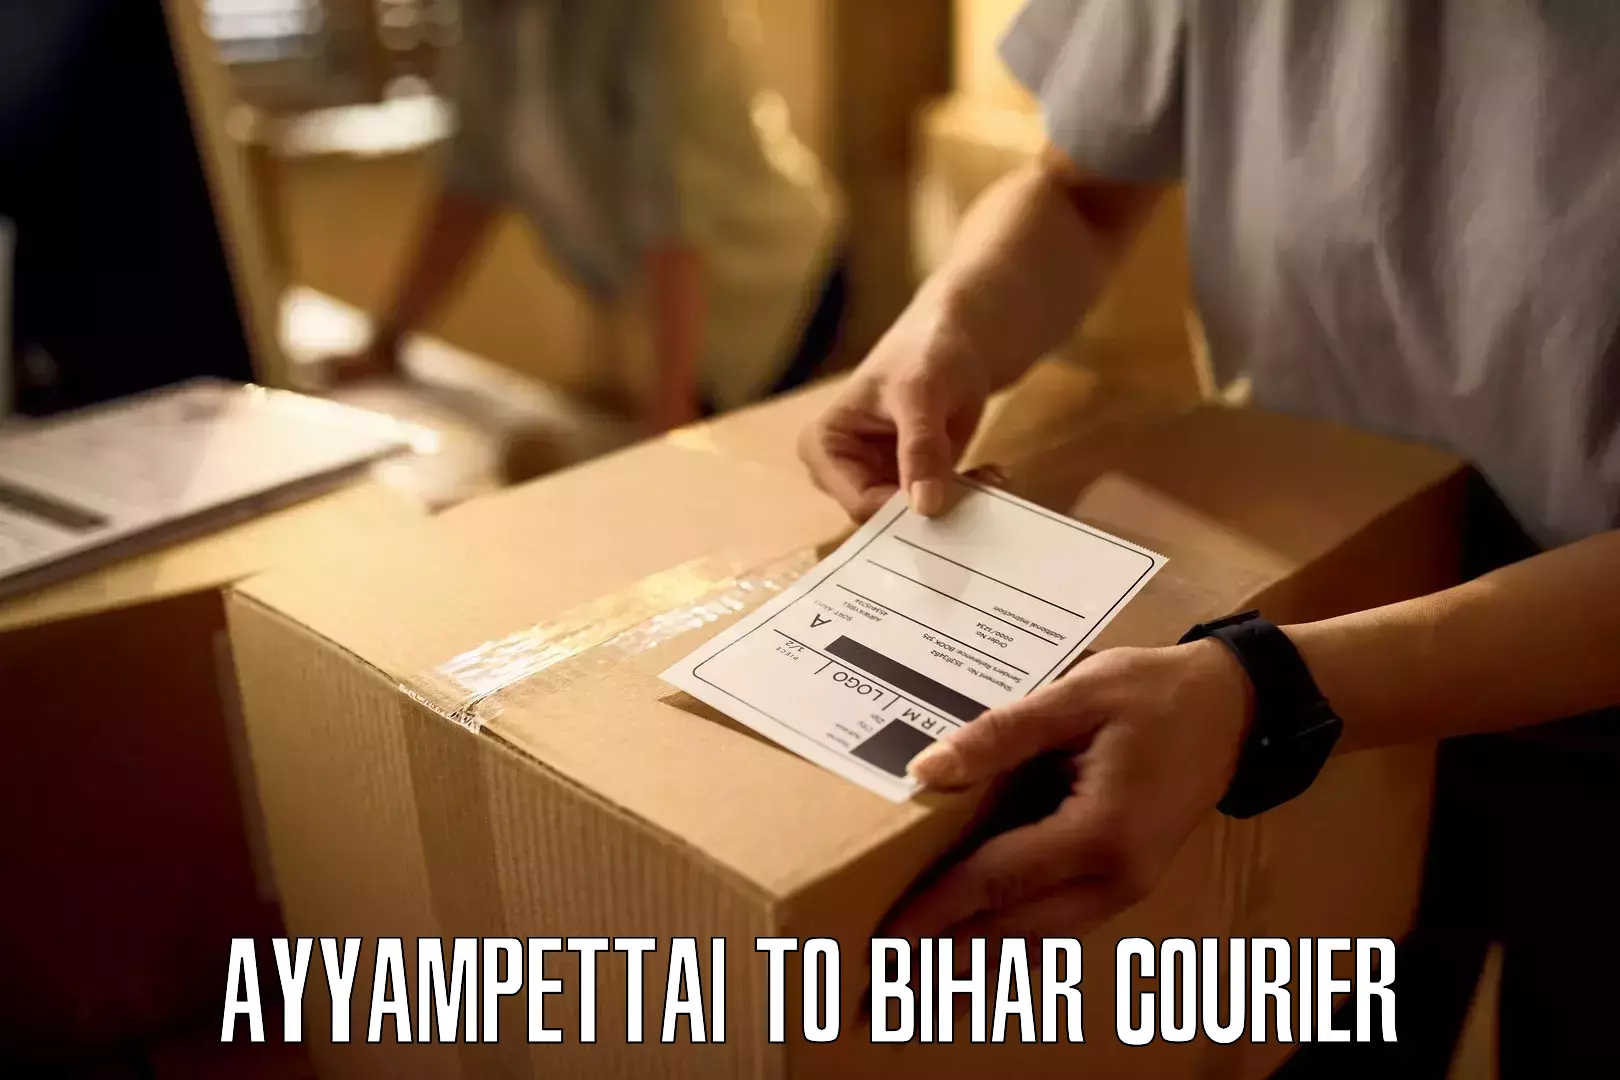 Nationwide courier service Ayyampettai to Fatwah